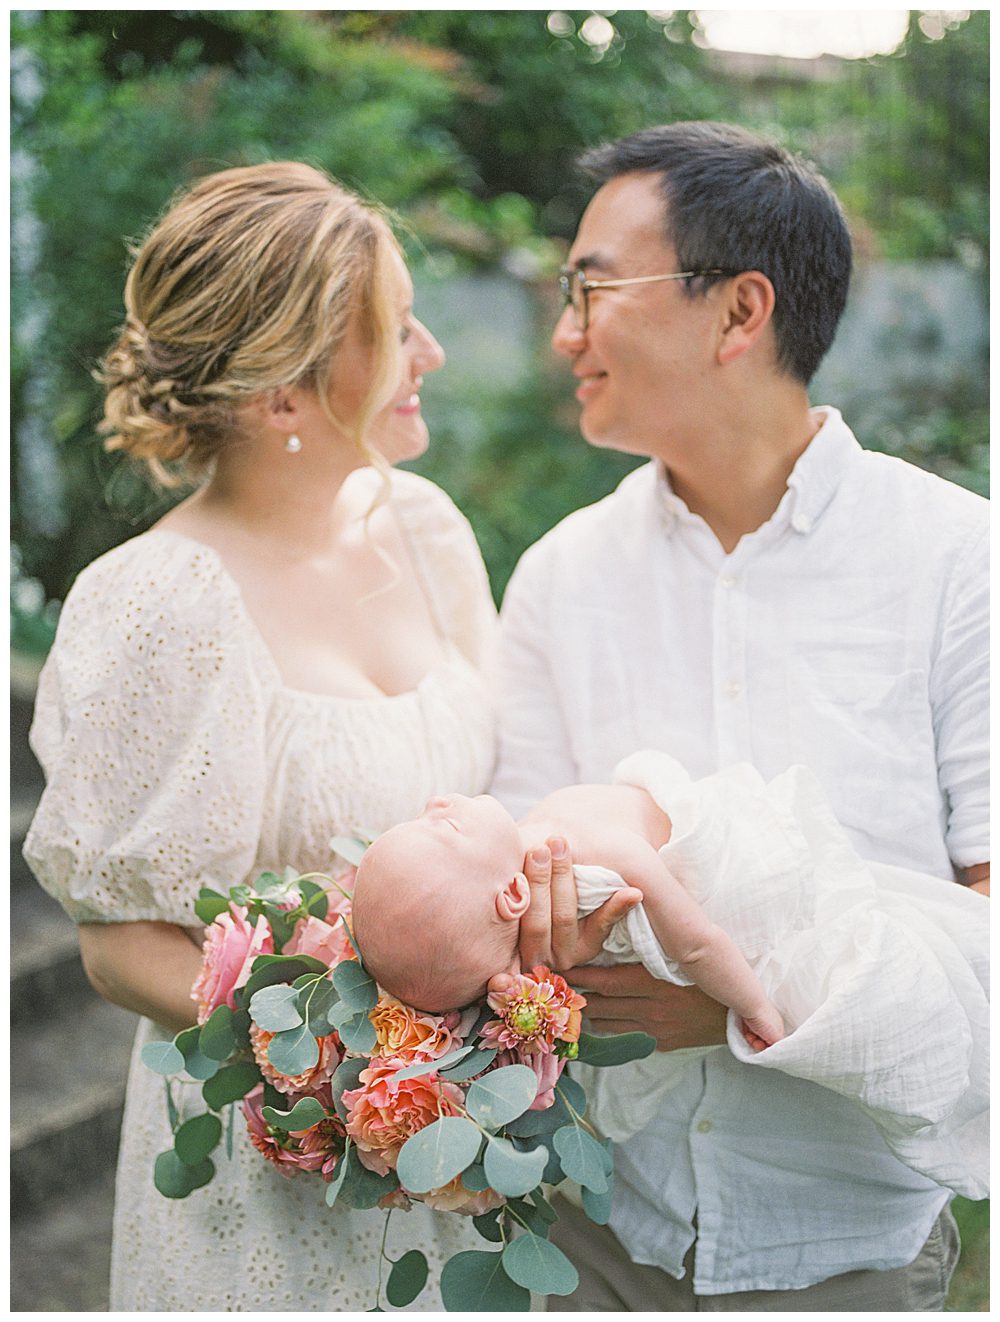 New parents hold their newborn daughter with bouquet of roses and smile at each other.